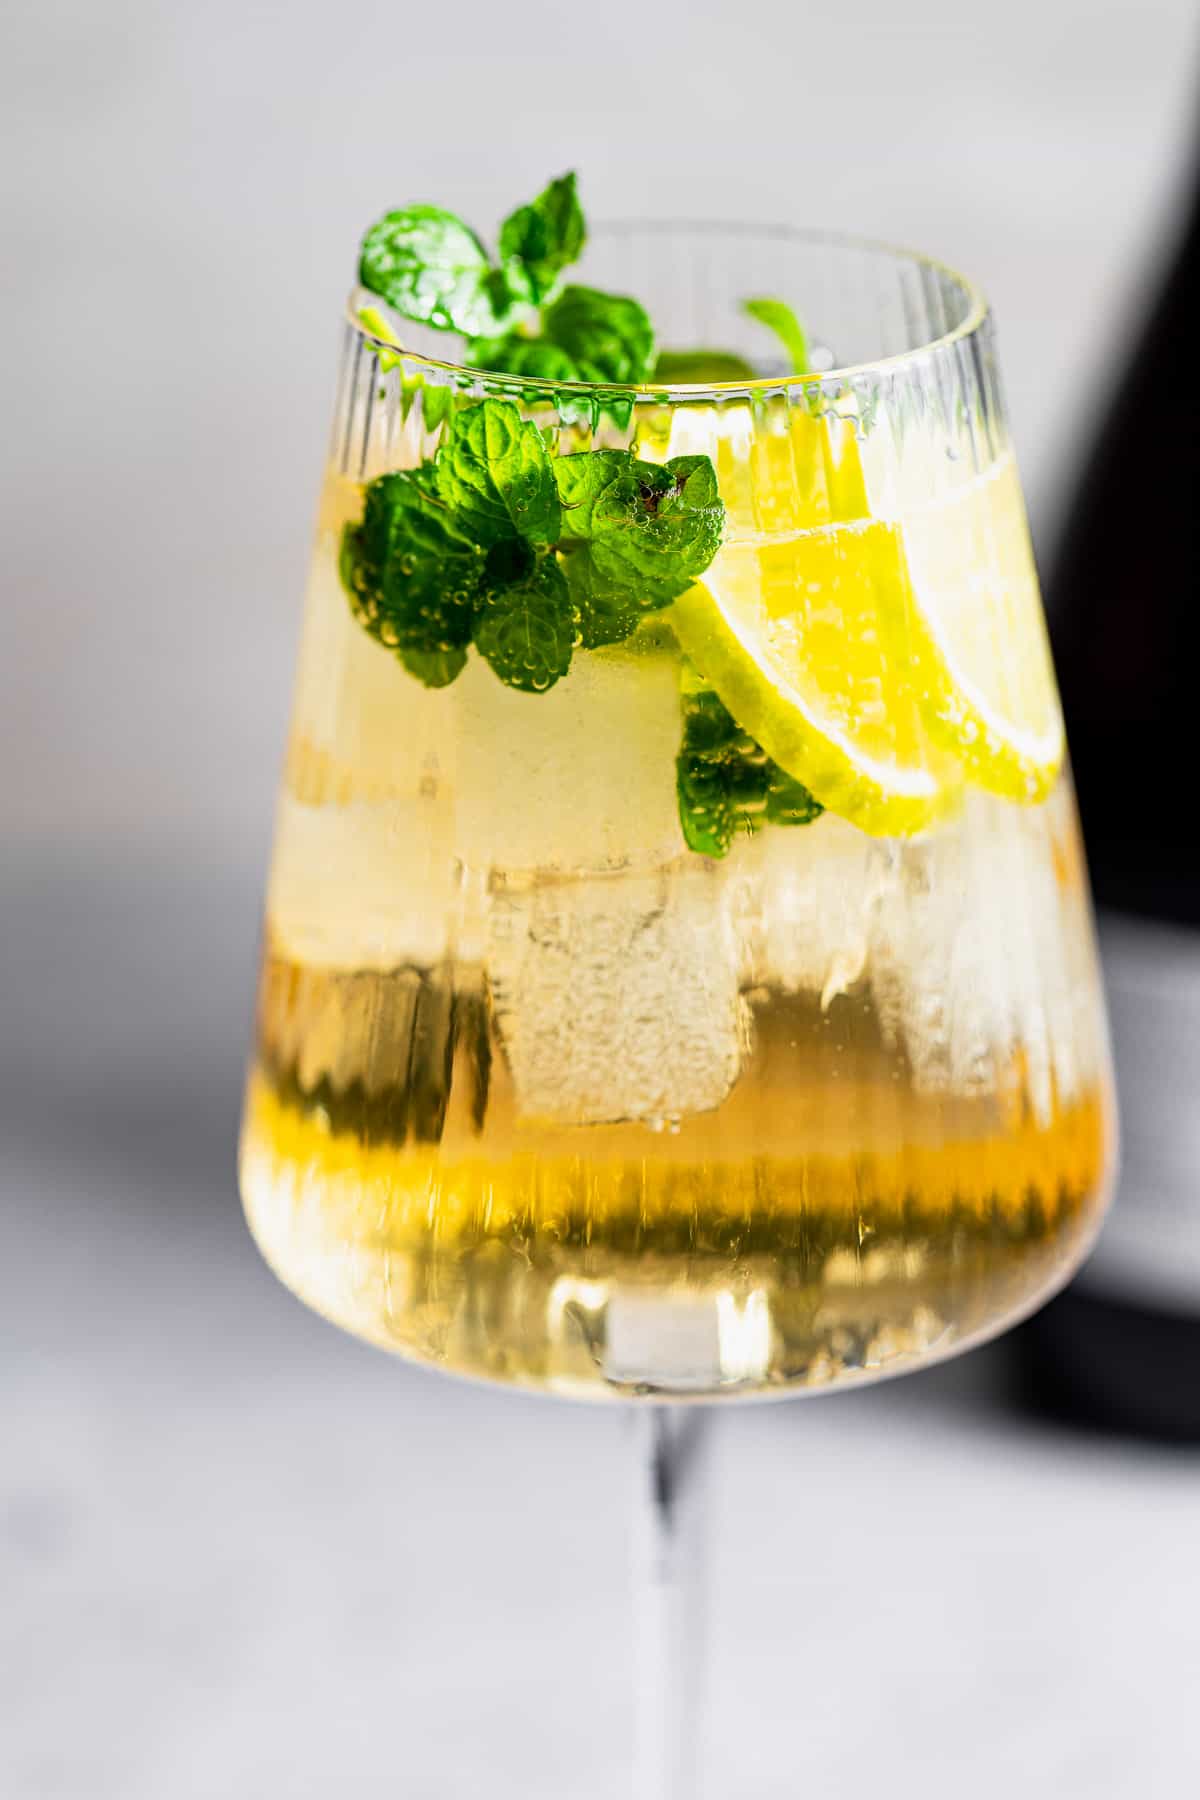 A Hugo Spritz cocktail with ice, mint, and lemon slices.